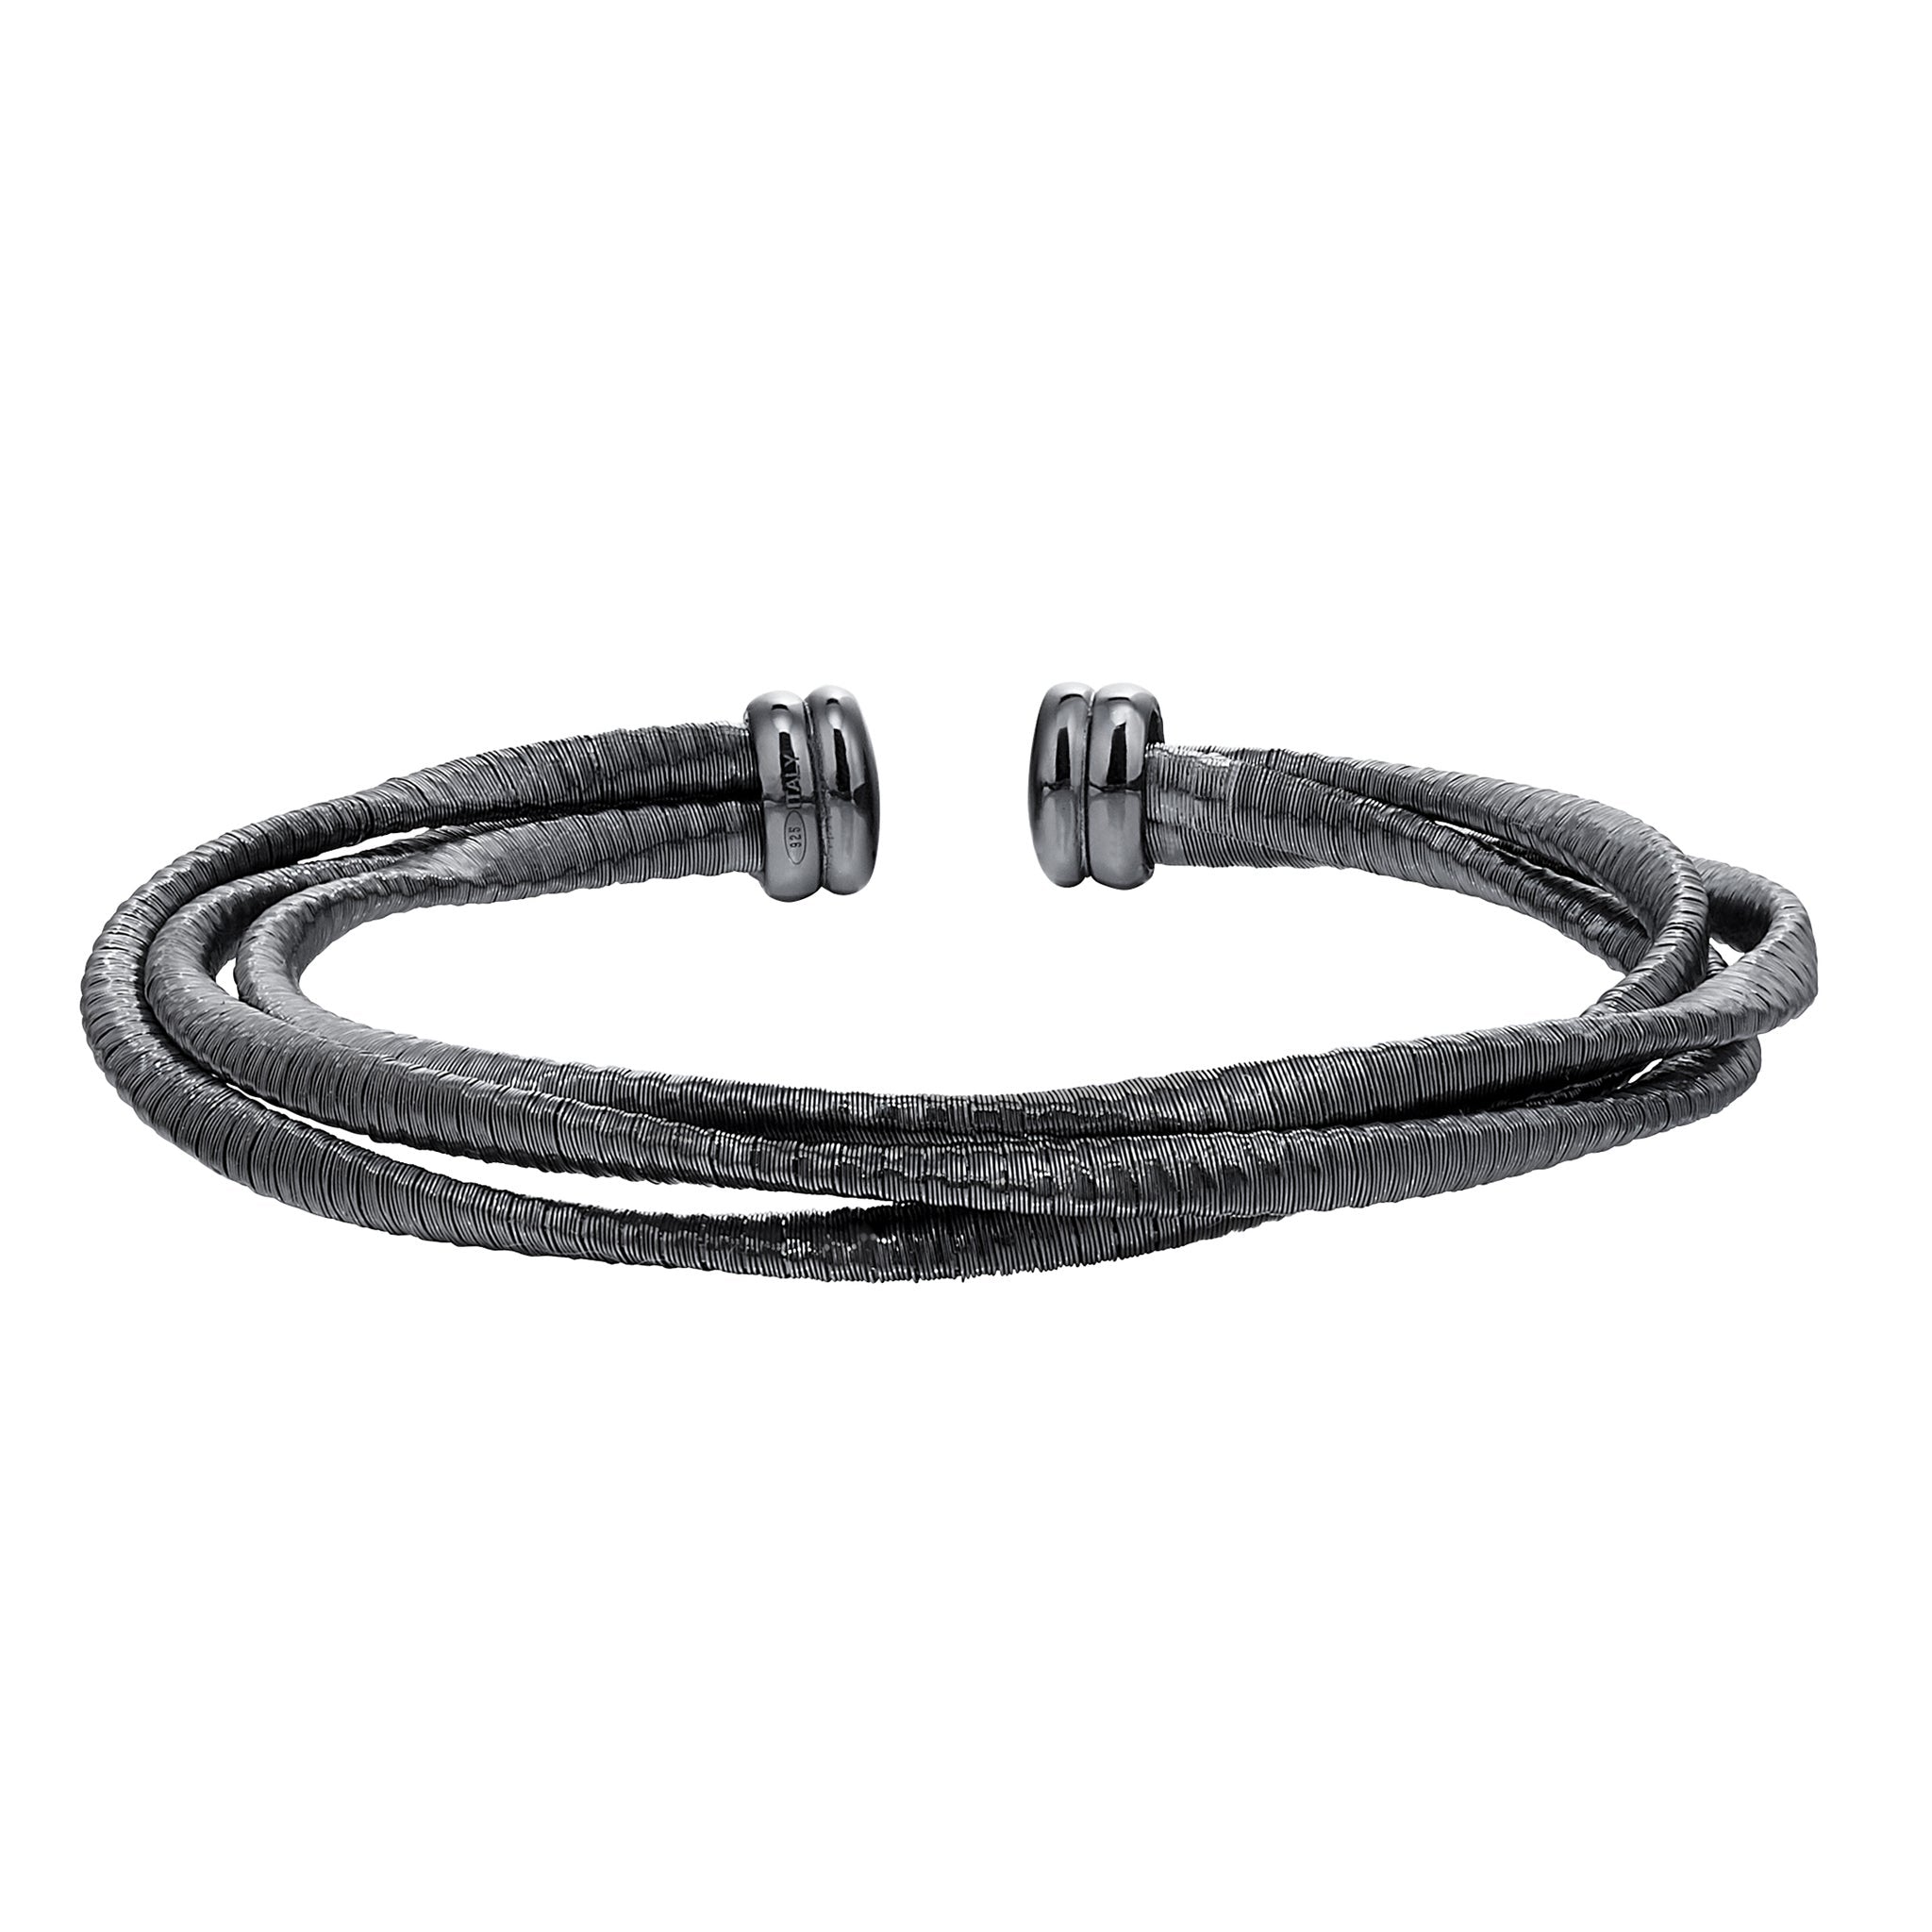 Adjustable Stainless Steel Twisted Cable Cuff Deutsch Bangle Bracelet Large  Elasticity For Men And Womens Jewelry In Silver And Gold From  Charmspendant, $8.71 | DHgate.Com